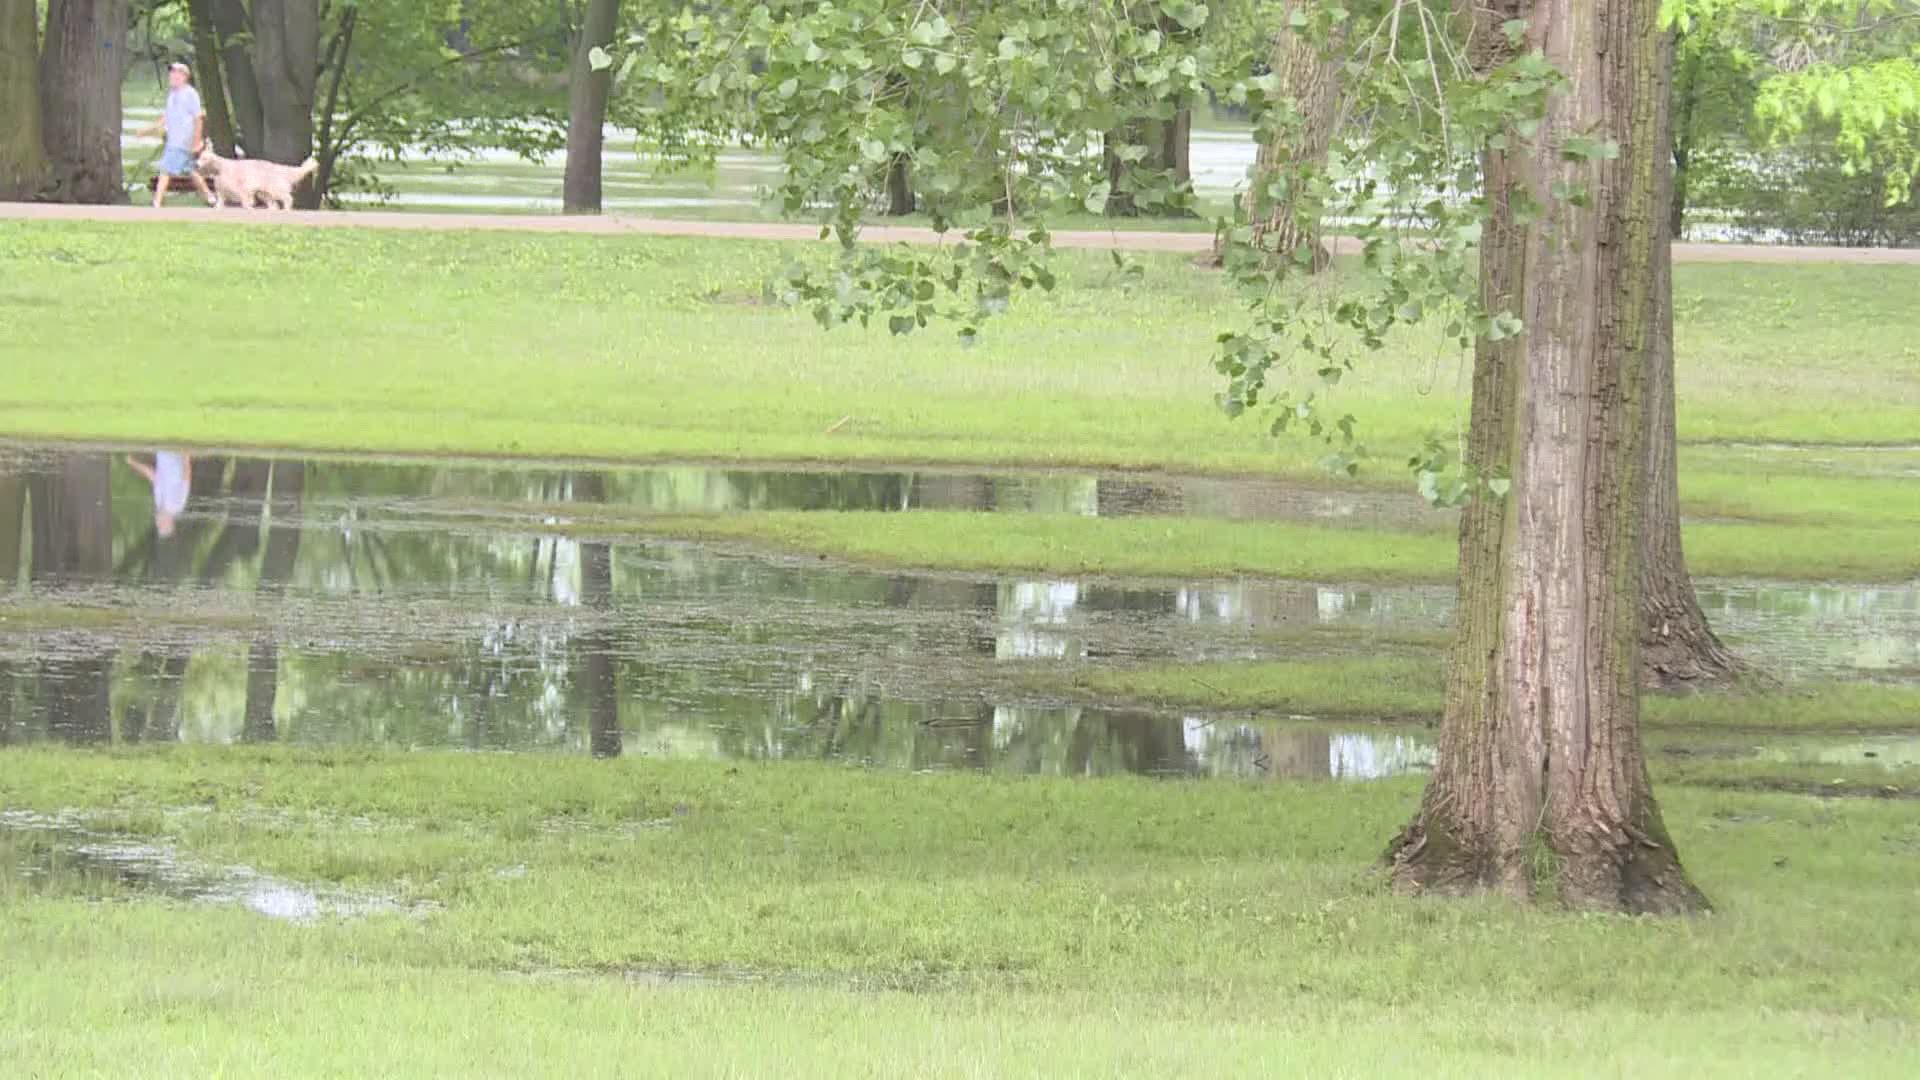 People looking to unwind at city parks are finding options limited due to the coronavirus and now flooding.